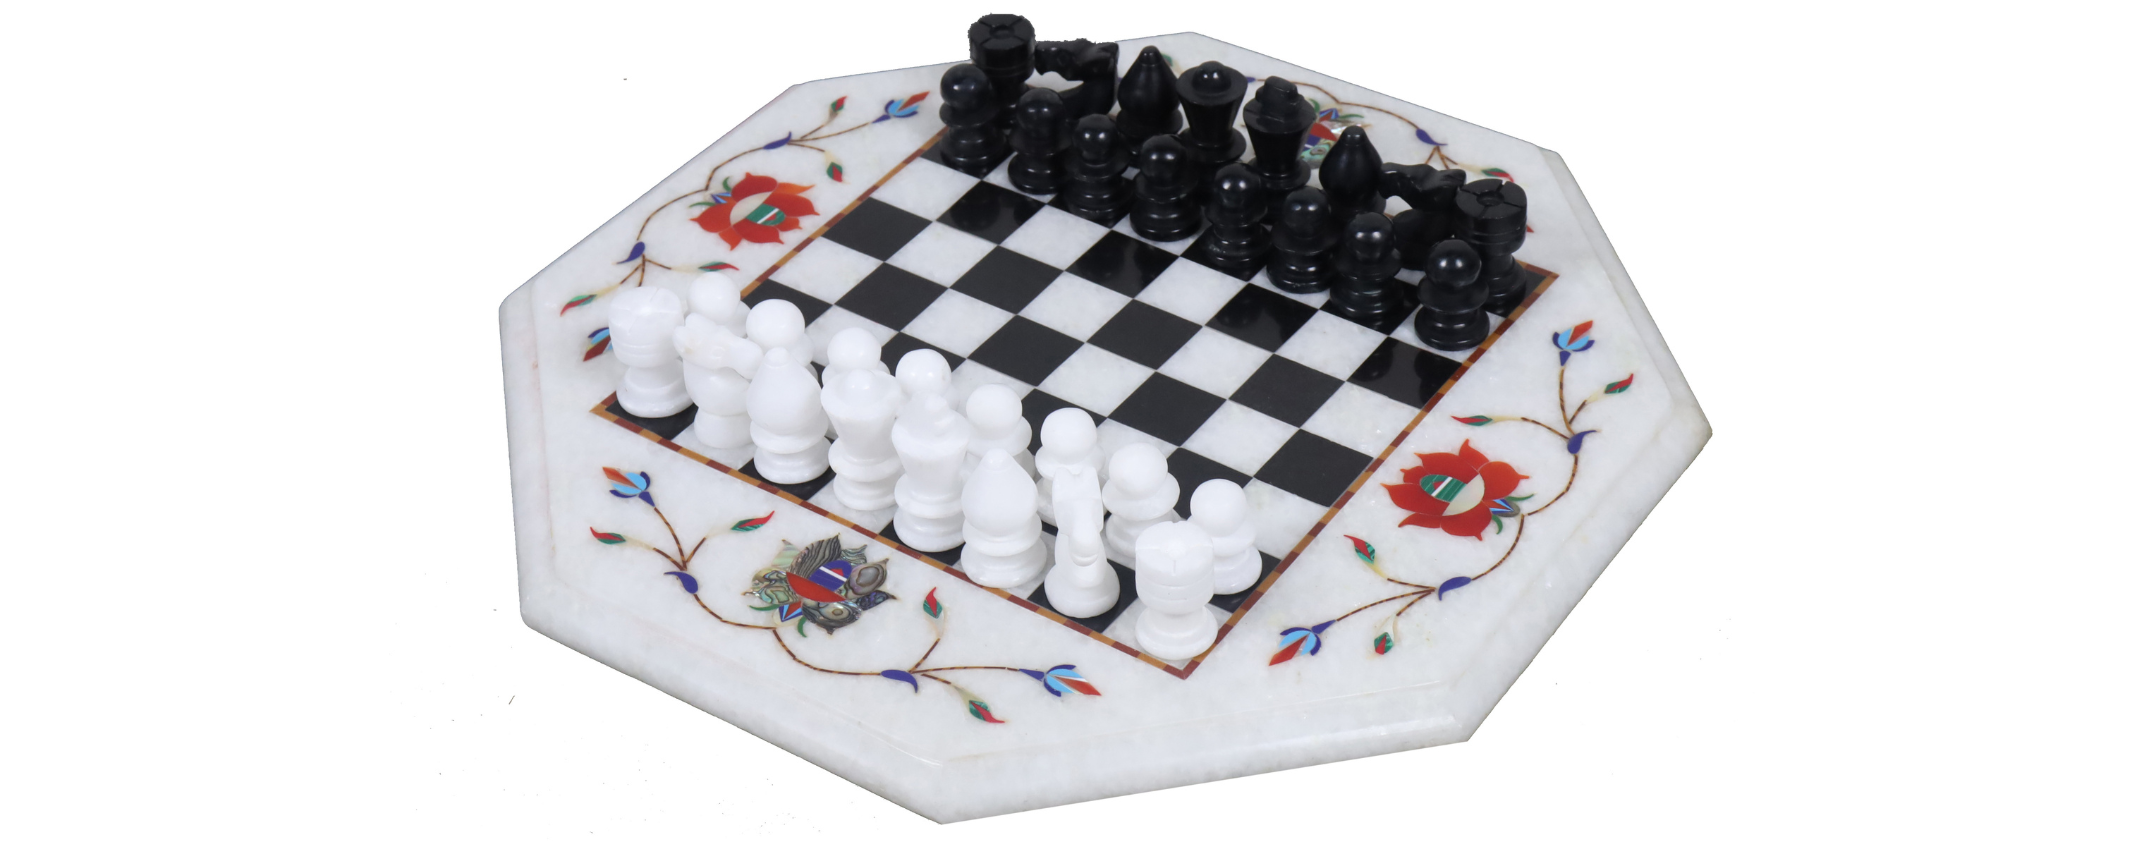 Marble Chess Sets